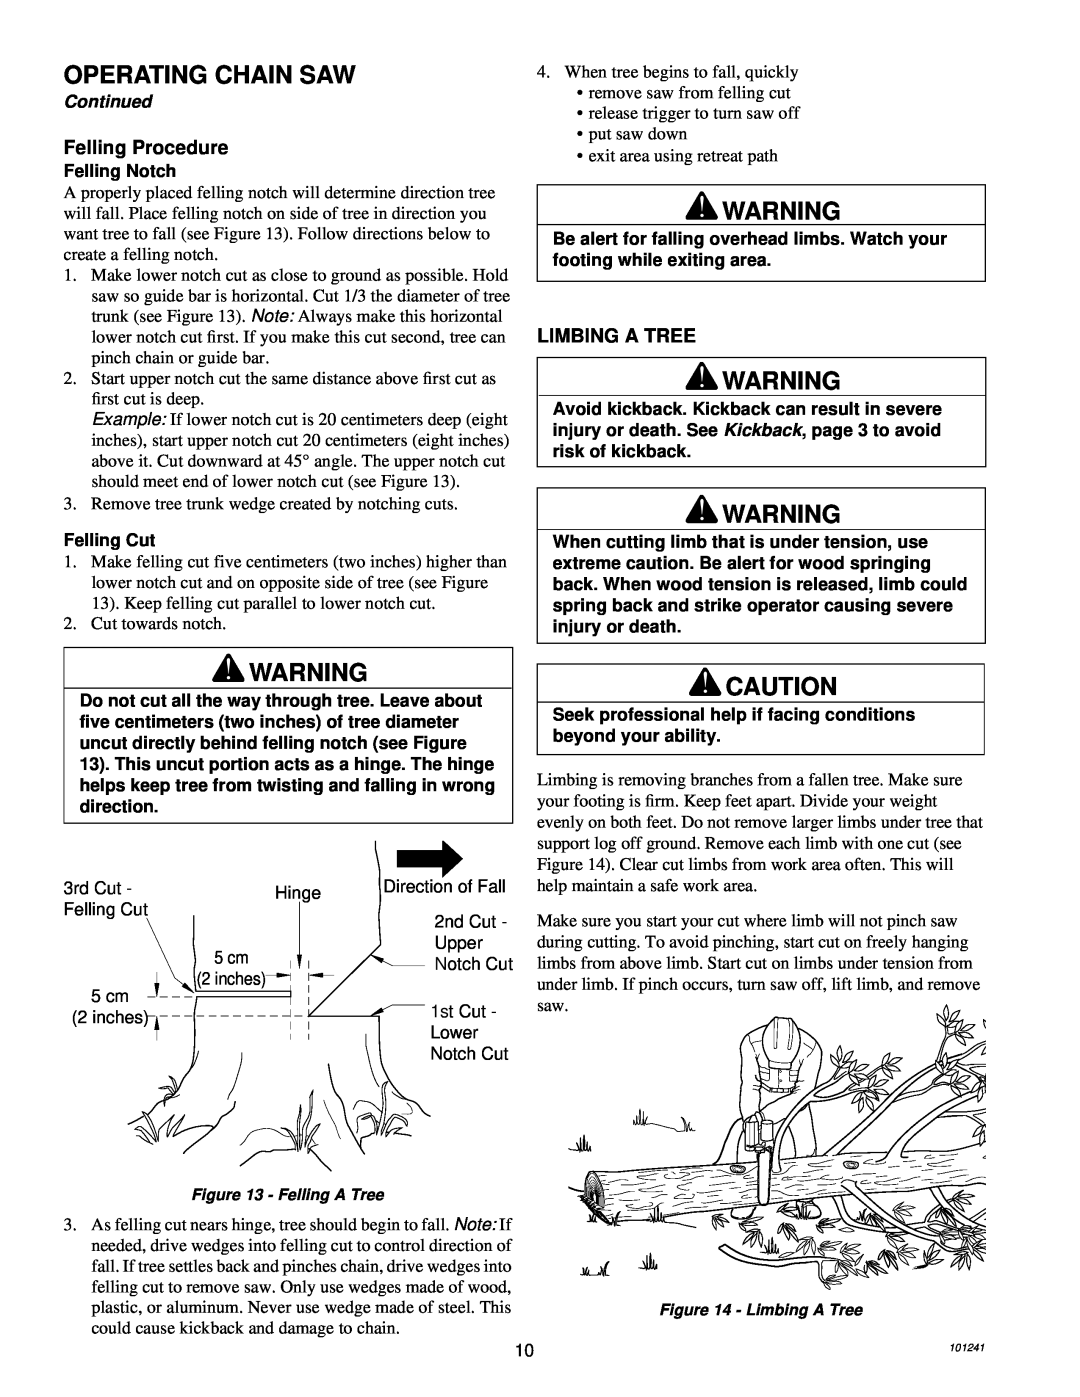 Remington 100582-01, 100582-02 owner manual Felling Procedure, Limbing A Tree, Operating Chain Saw, Continued 